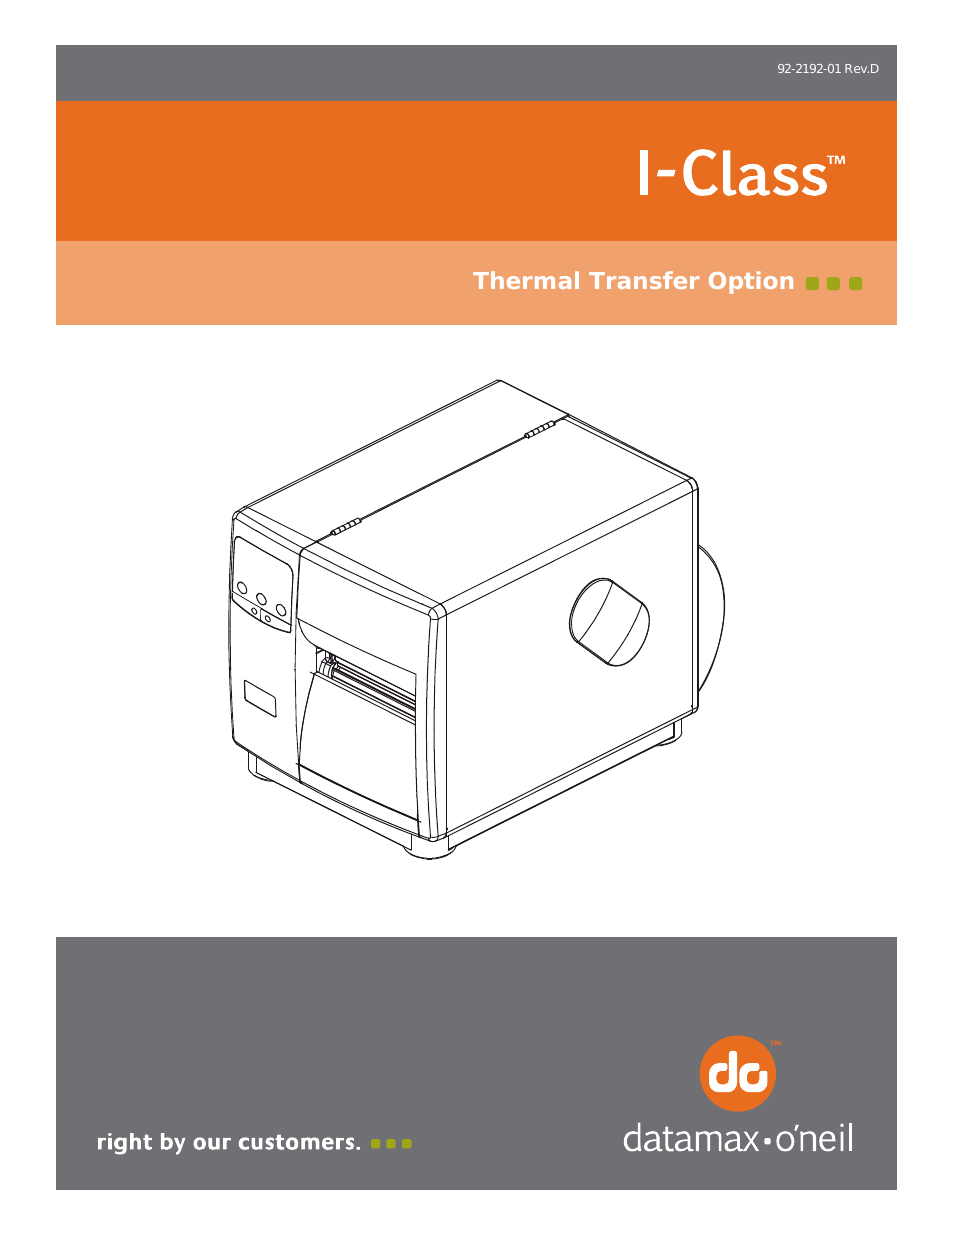 I-Class Thermal Transfer Option